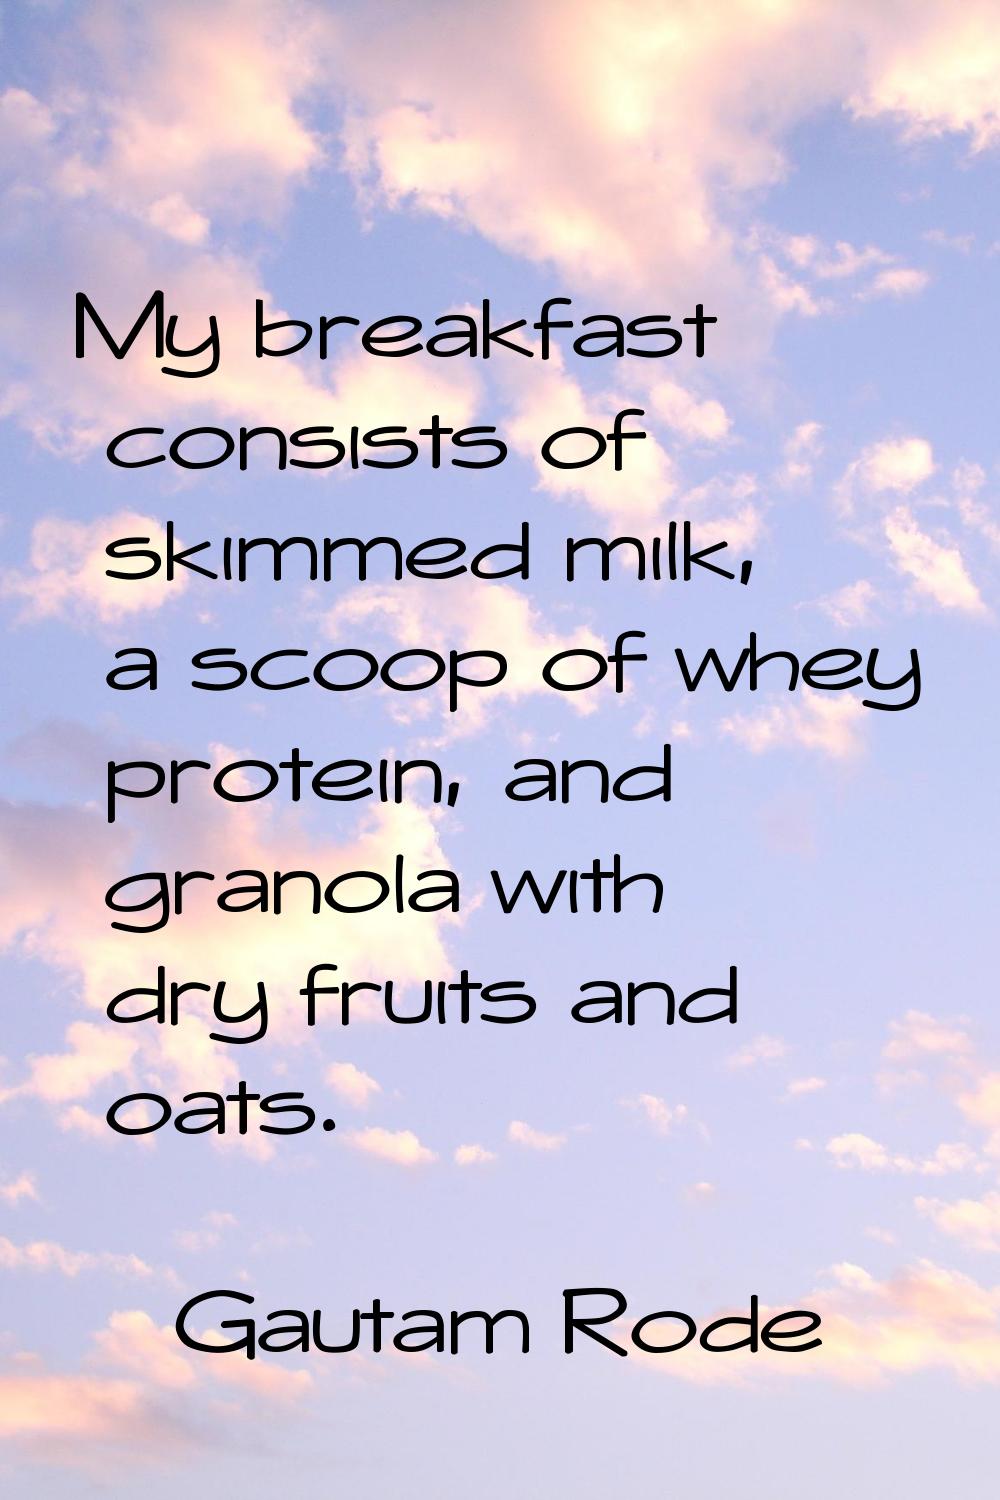 My breakfast consists of skimmed milk, a scoop of whey protein, and granola with dry fruits and oat